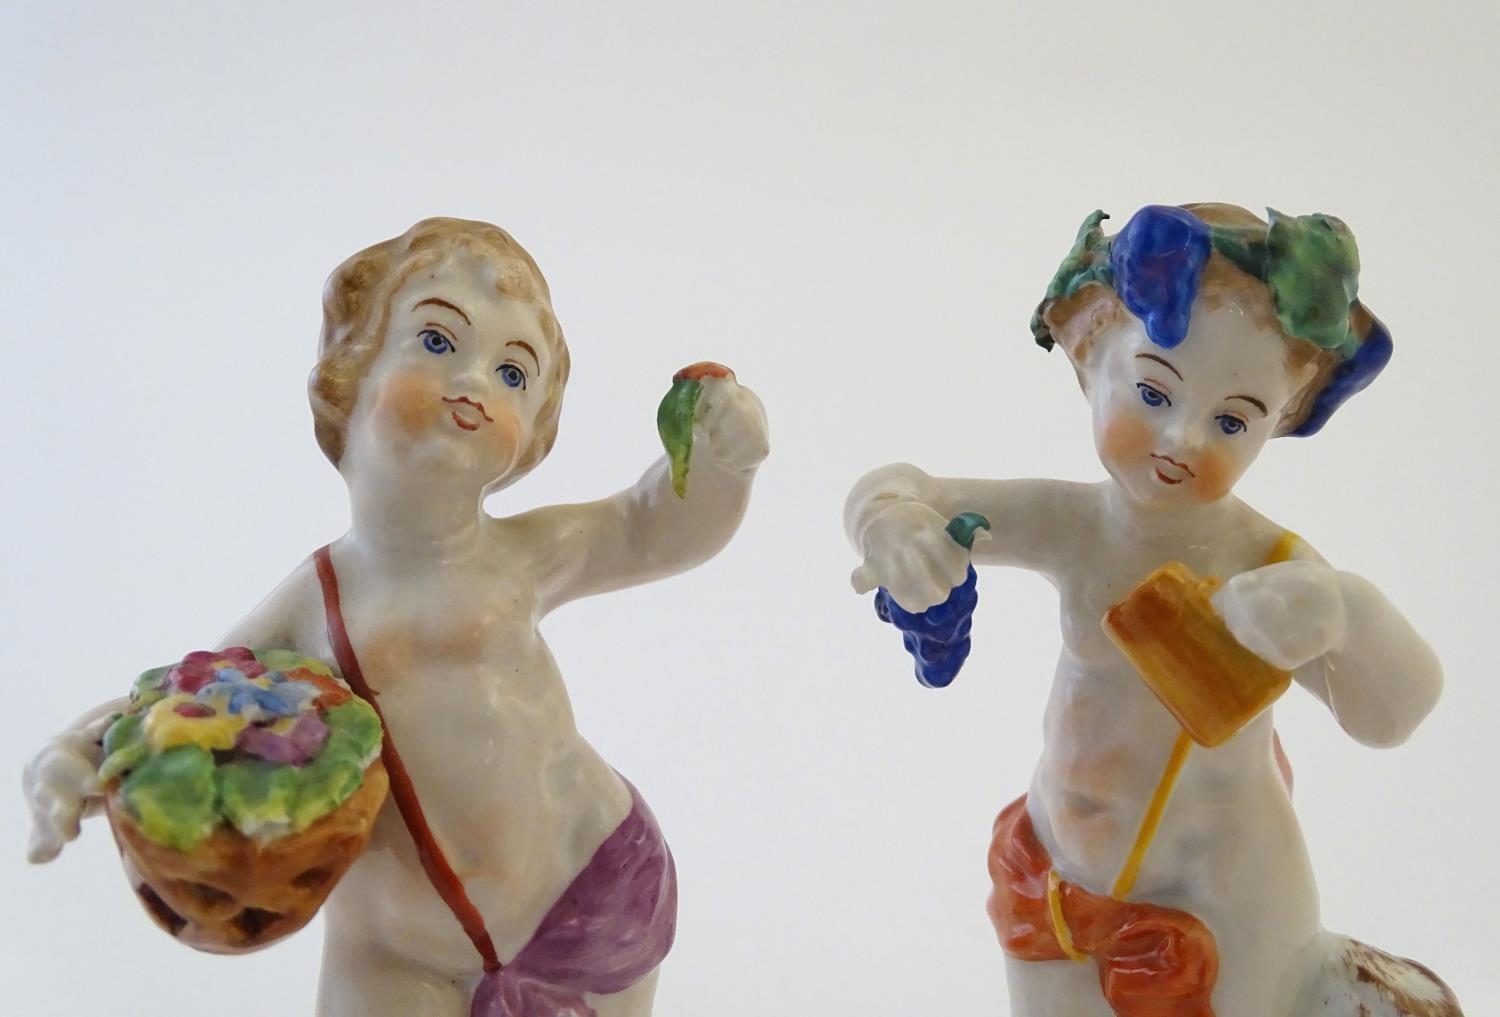 Two Italian putti / cherub figures depicting the seasons Spring and Summer, one with a basket of - Image 5 of 8